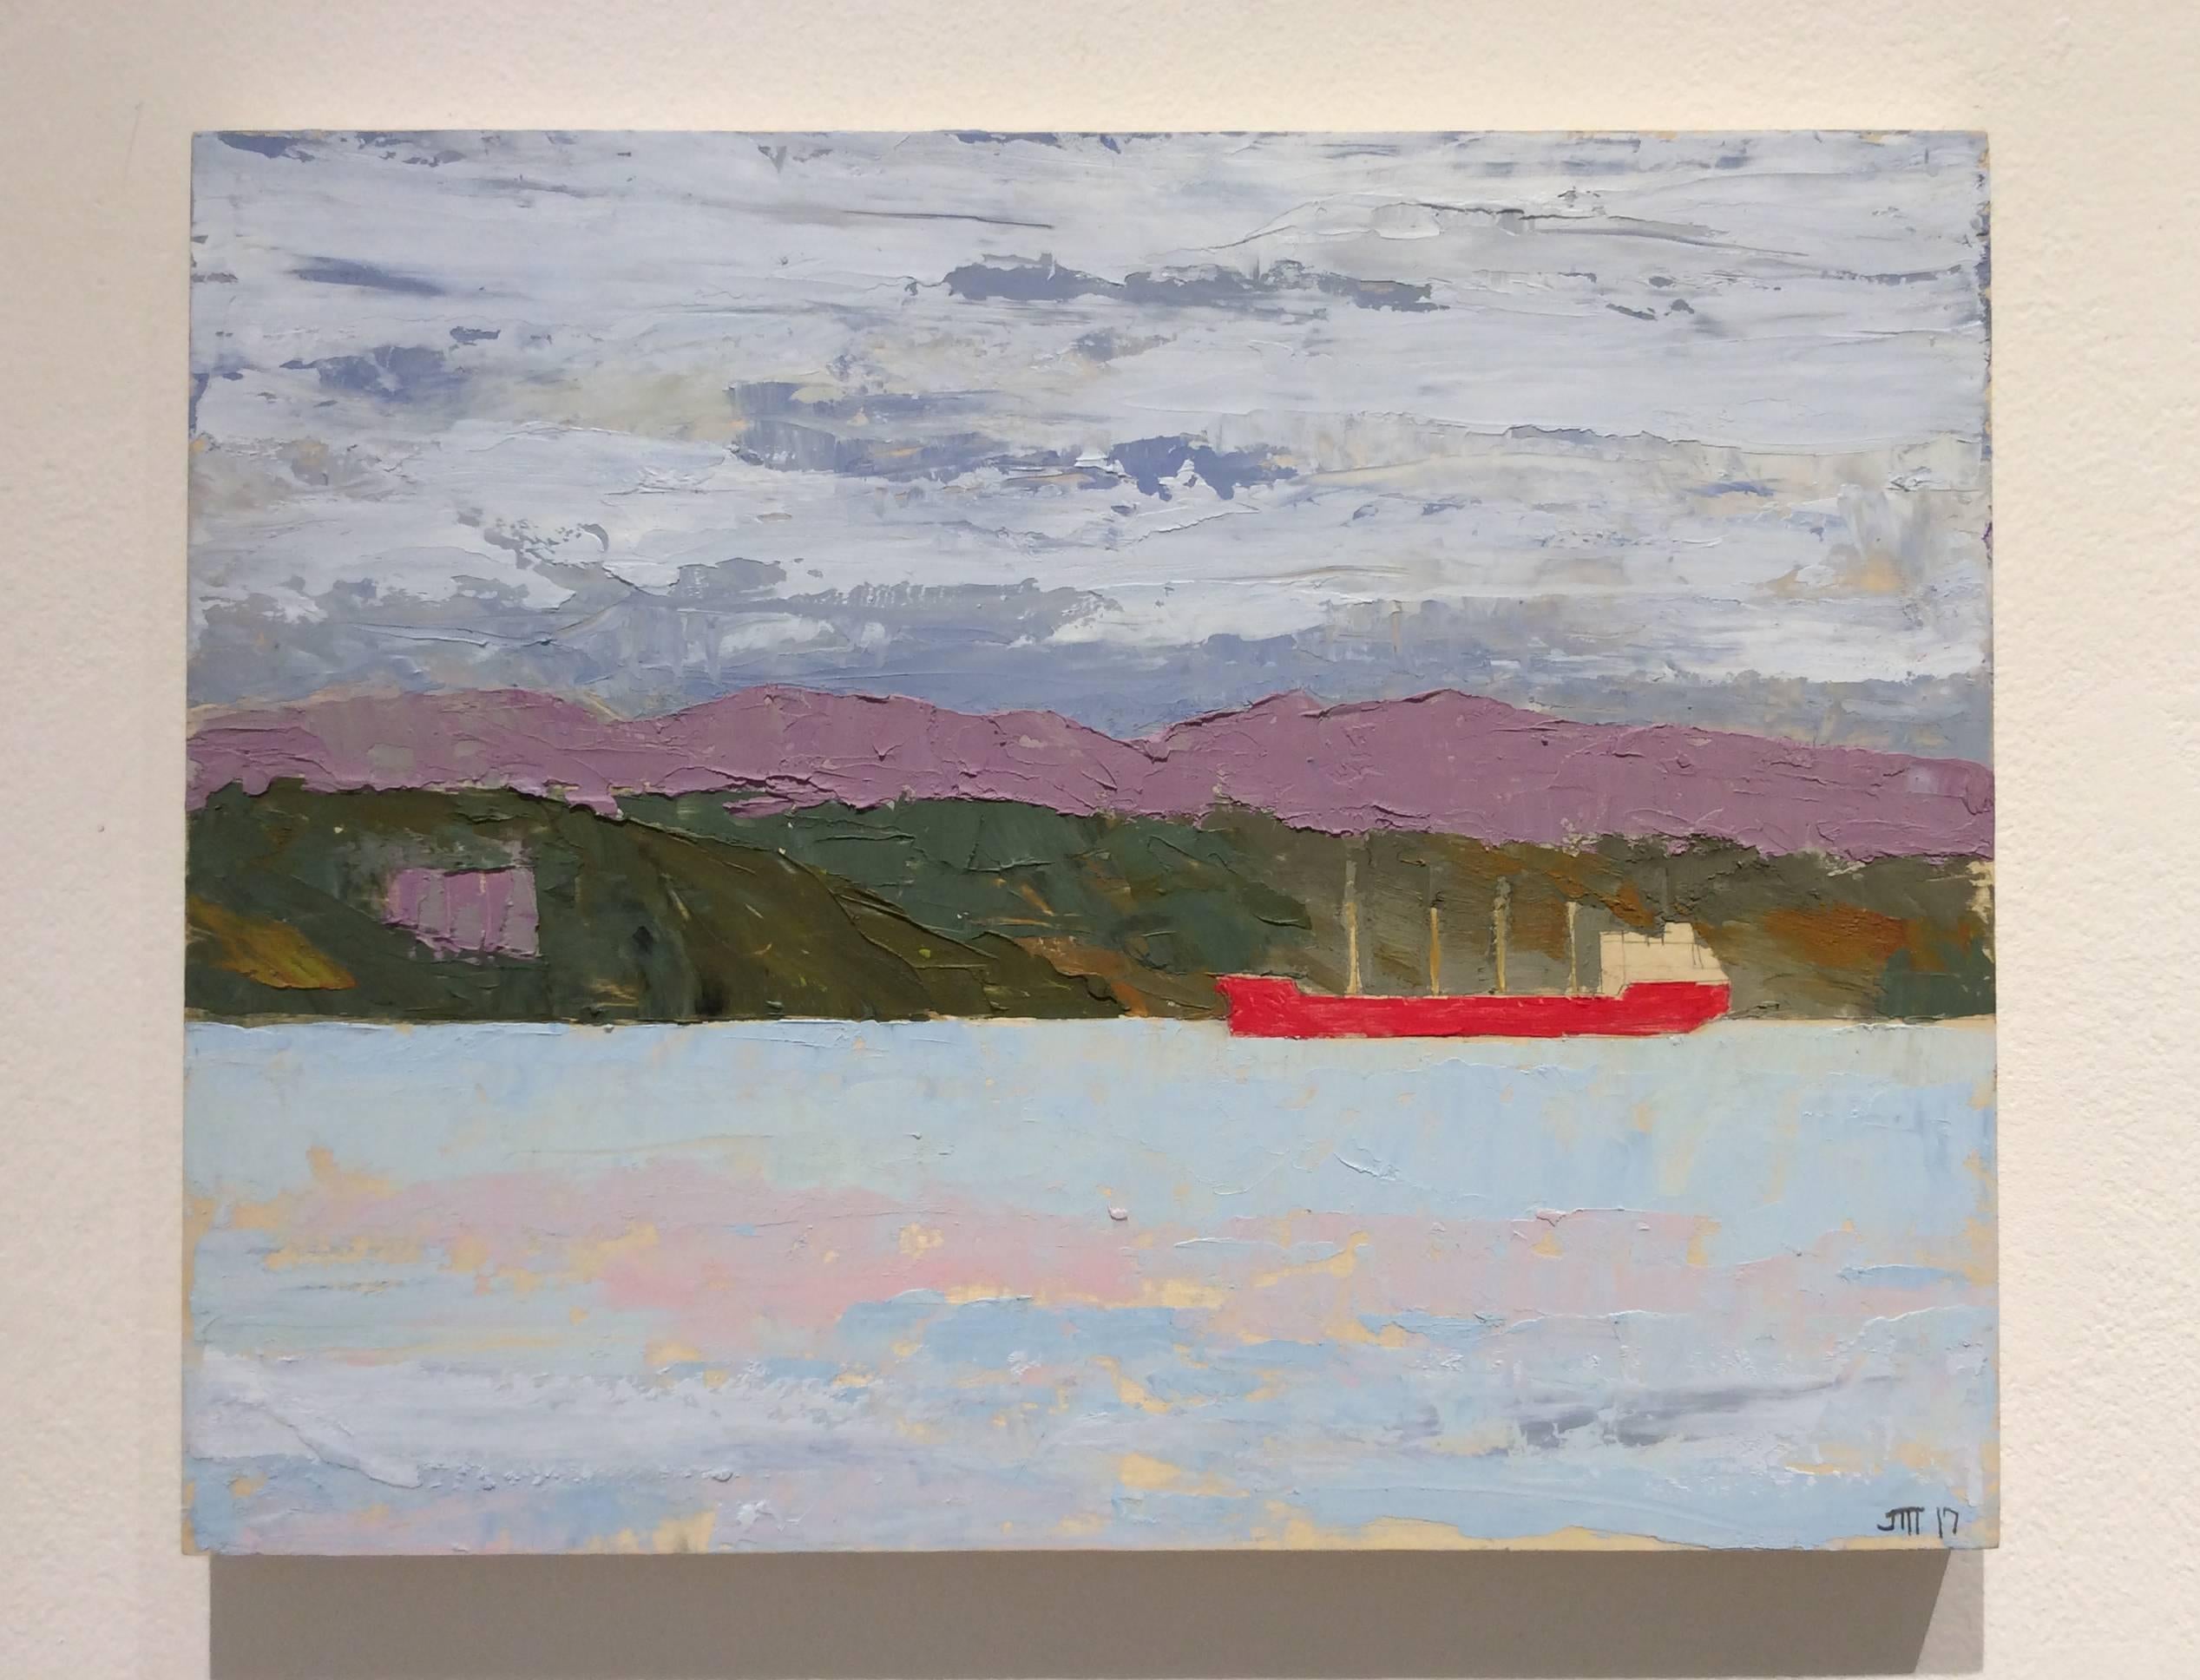 Untitled III: Nautical Style Landscape Painting of Mountains & Boat on River 1